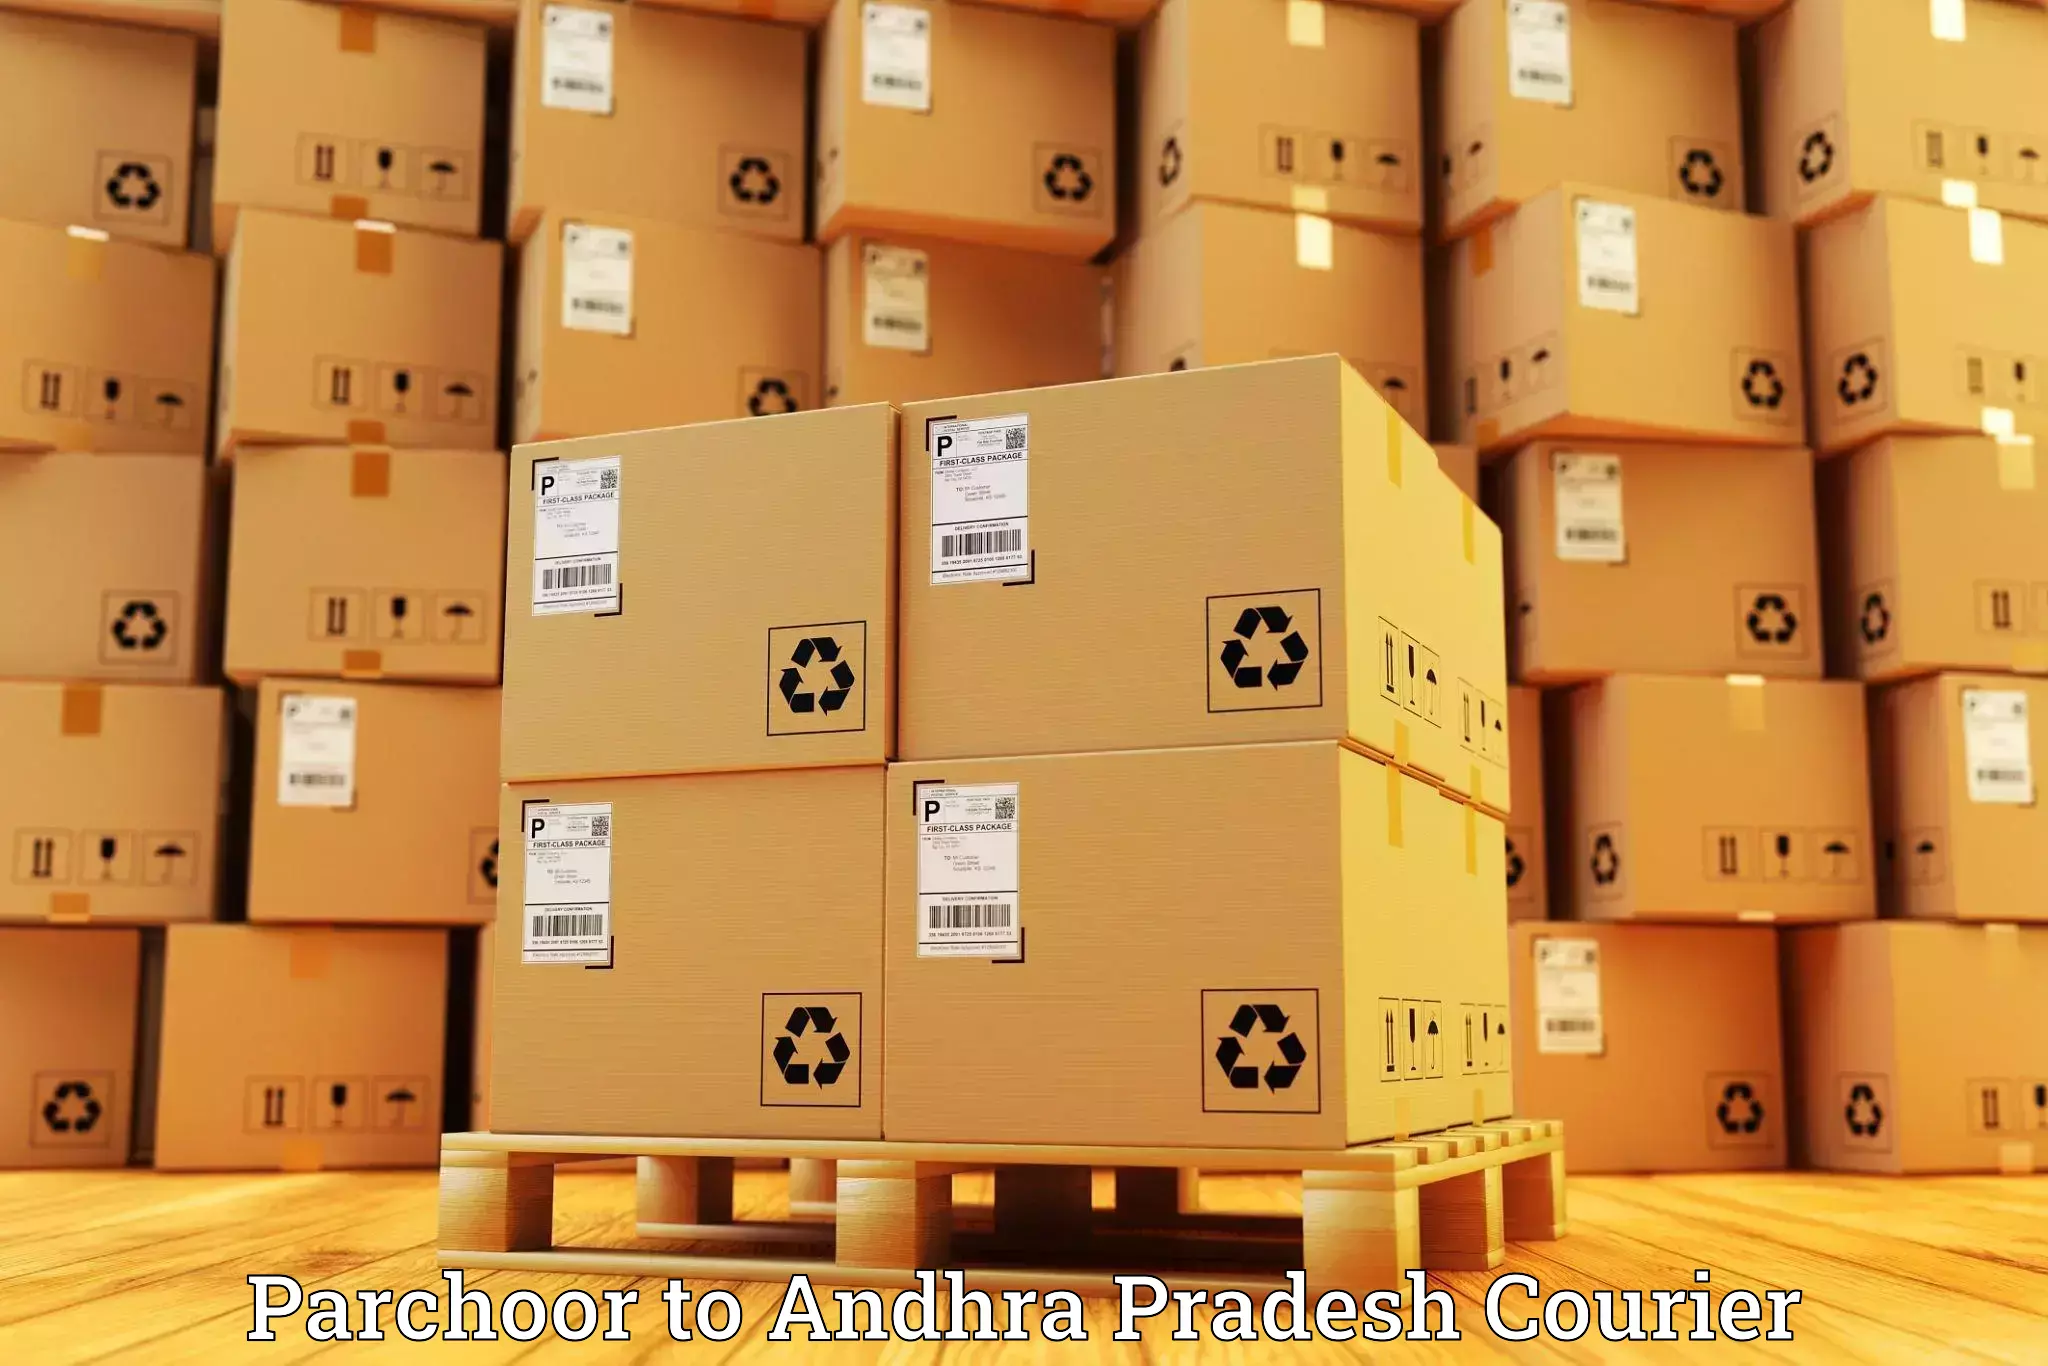 Customized shipping options in Parchoor to Chodavaram